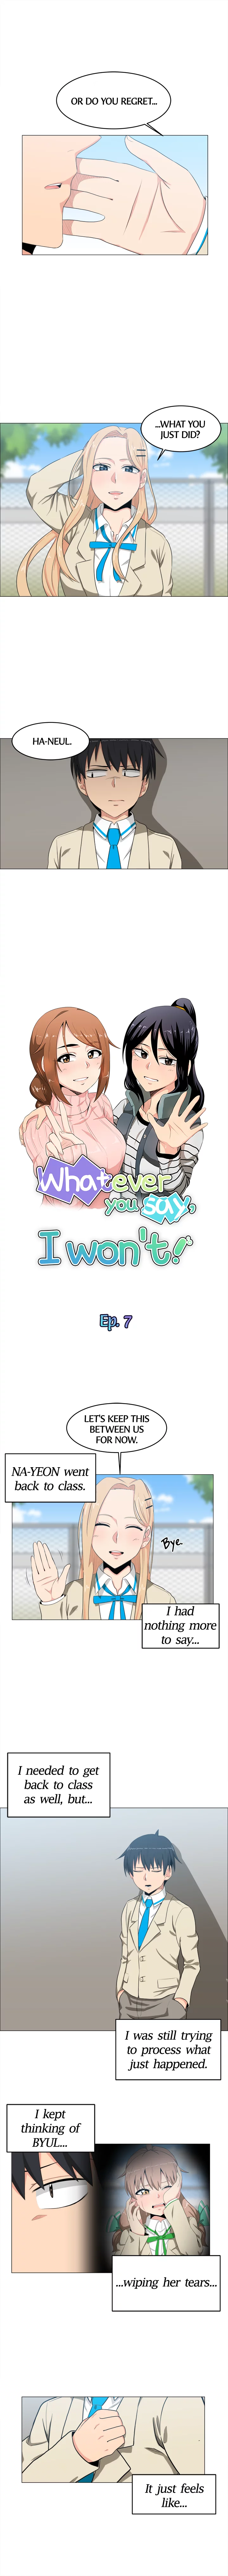 Whatever You Say, I Won't! - Chapter 7 Page 2